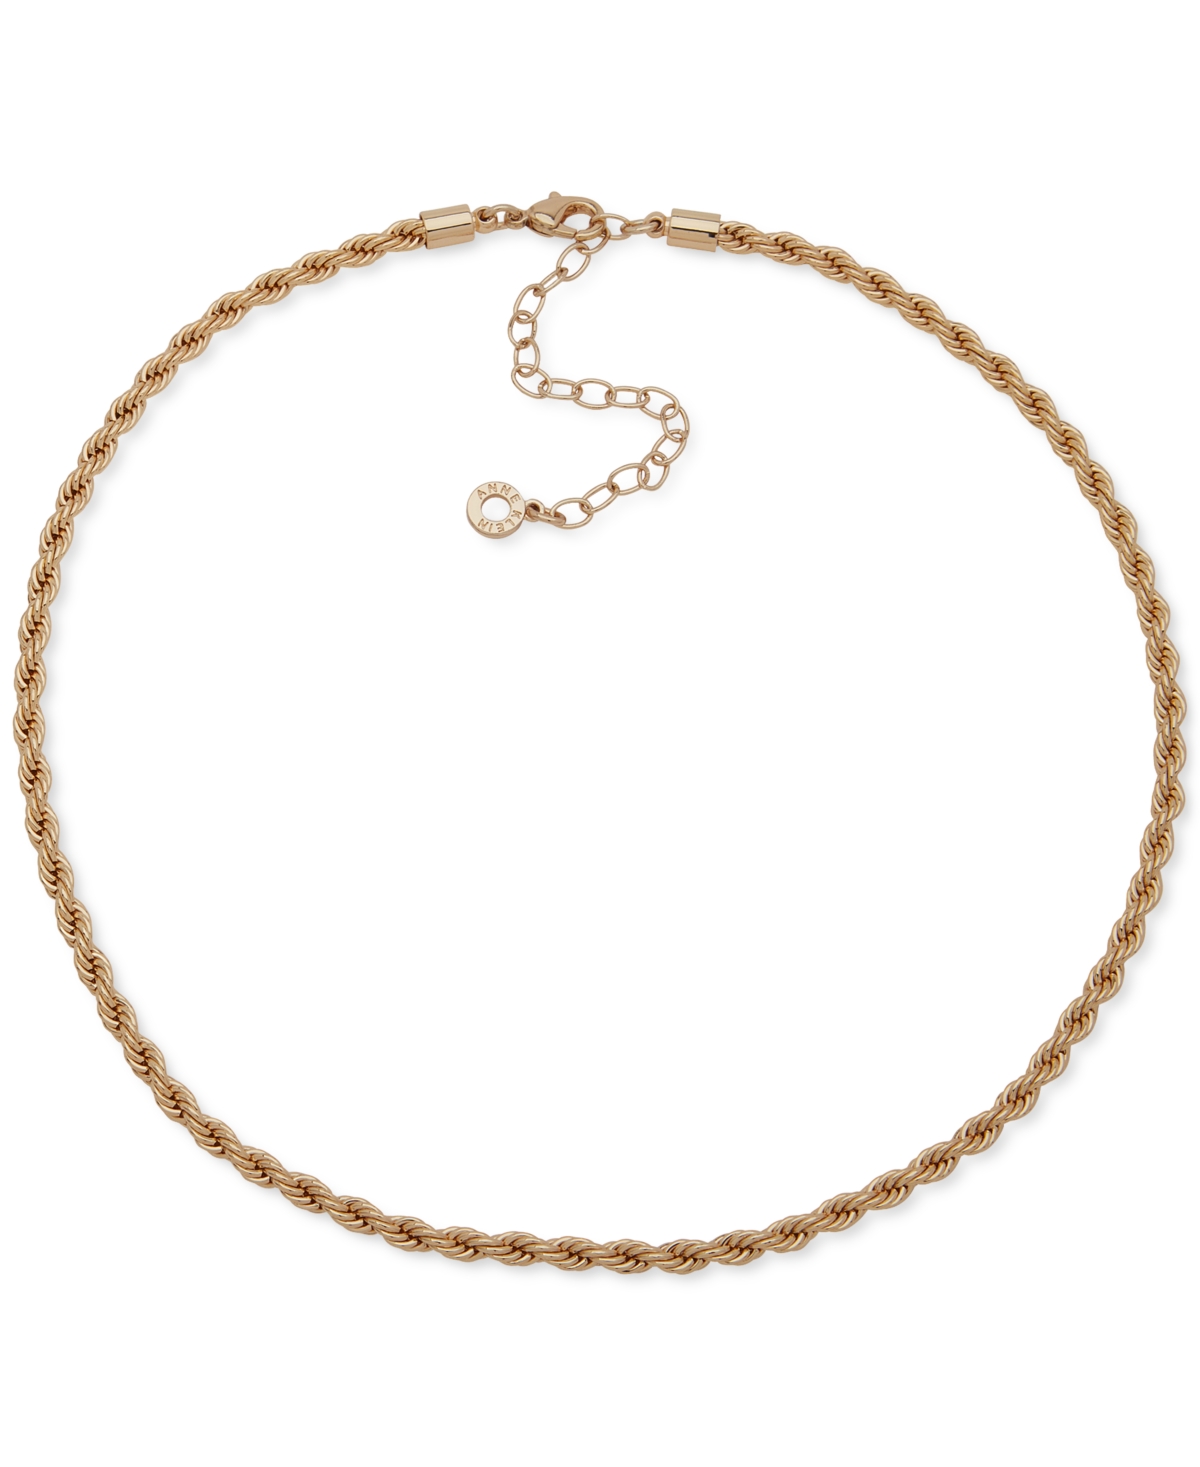 Anne Klein Gold-tone Rope Chain Collar Necklace, 16" + 3" Extender